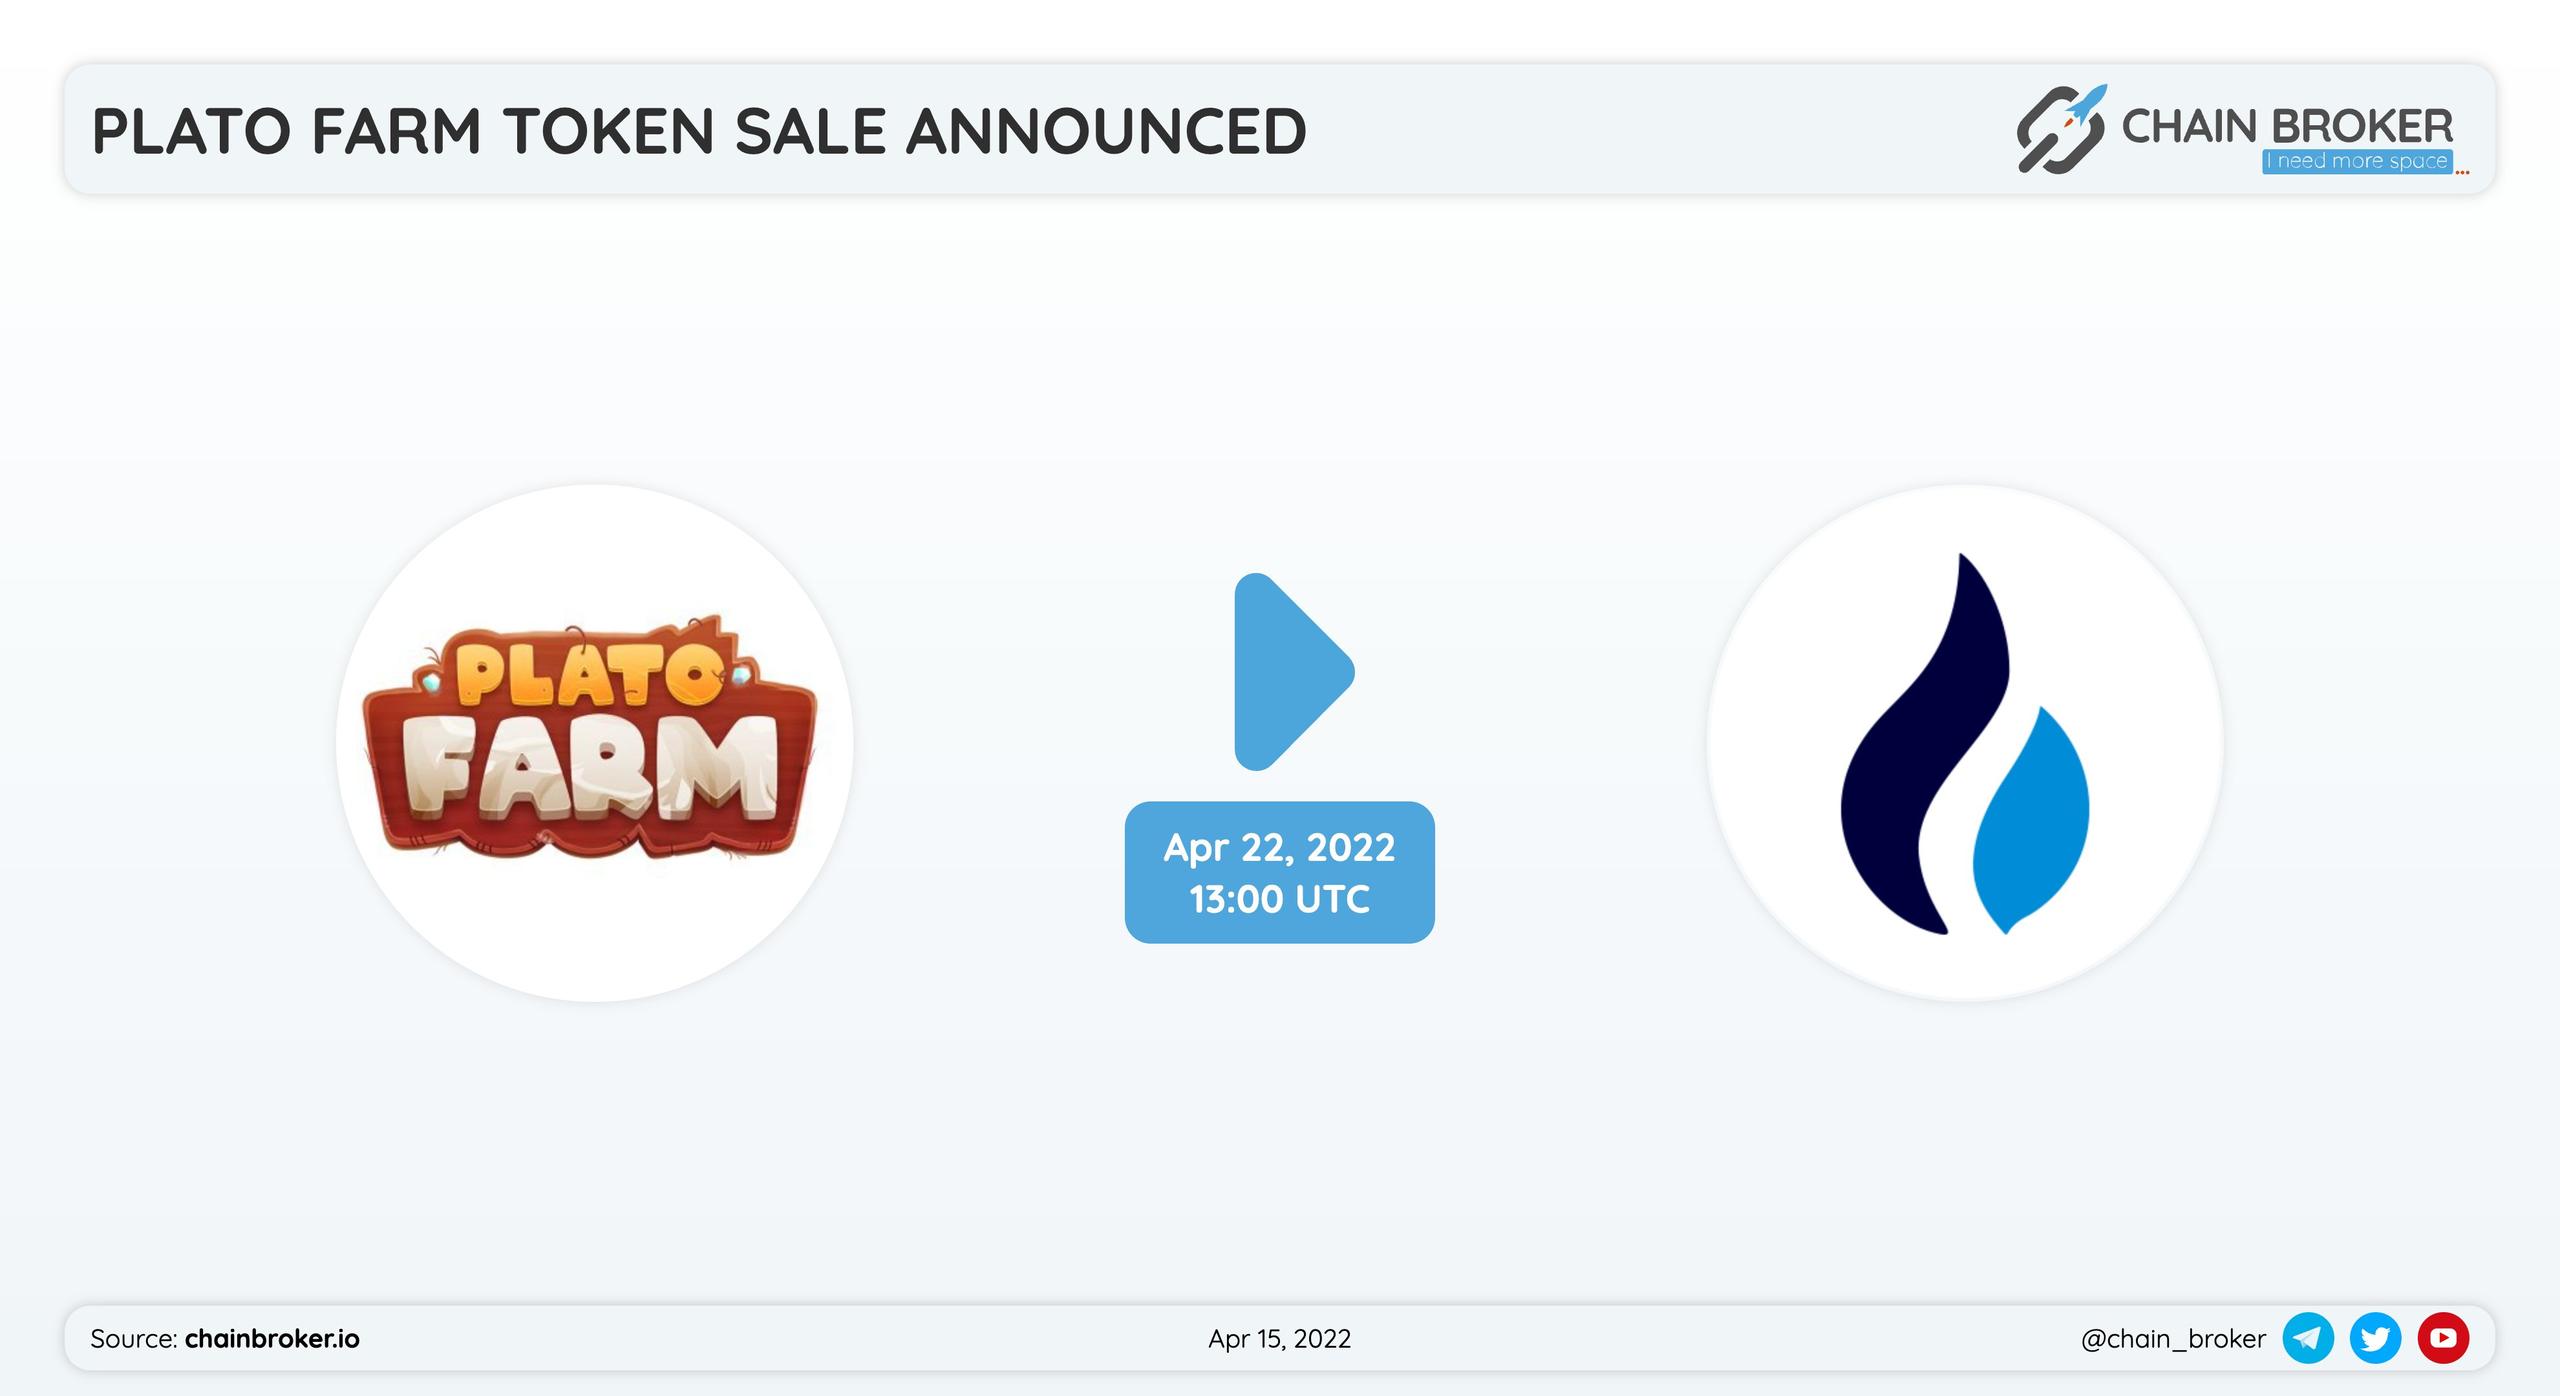 Plato Farm has partnered with Huobi Global for a token sale.